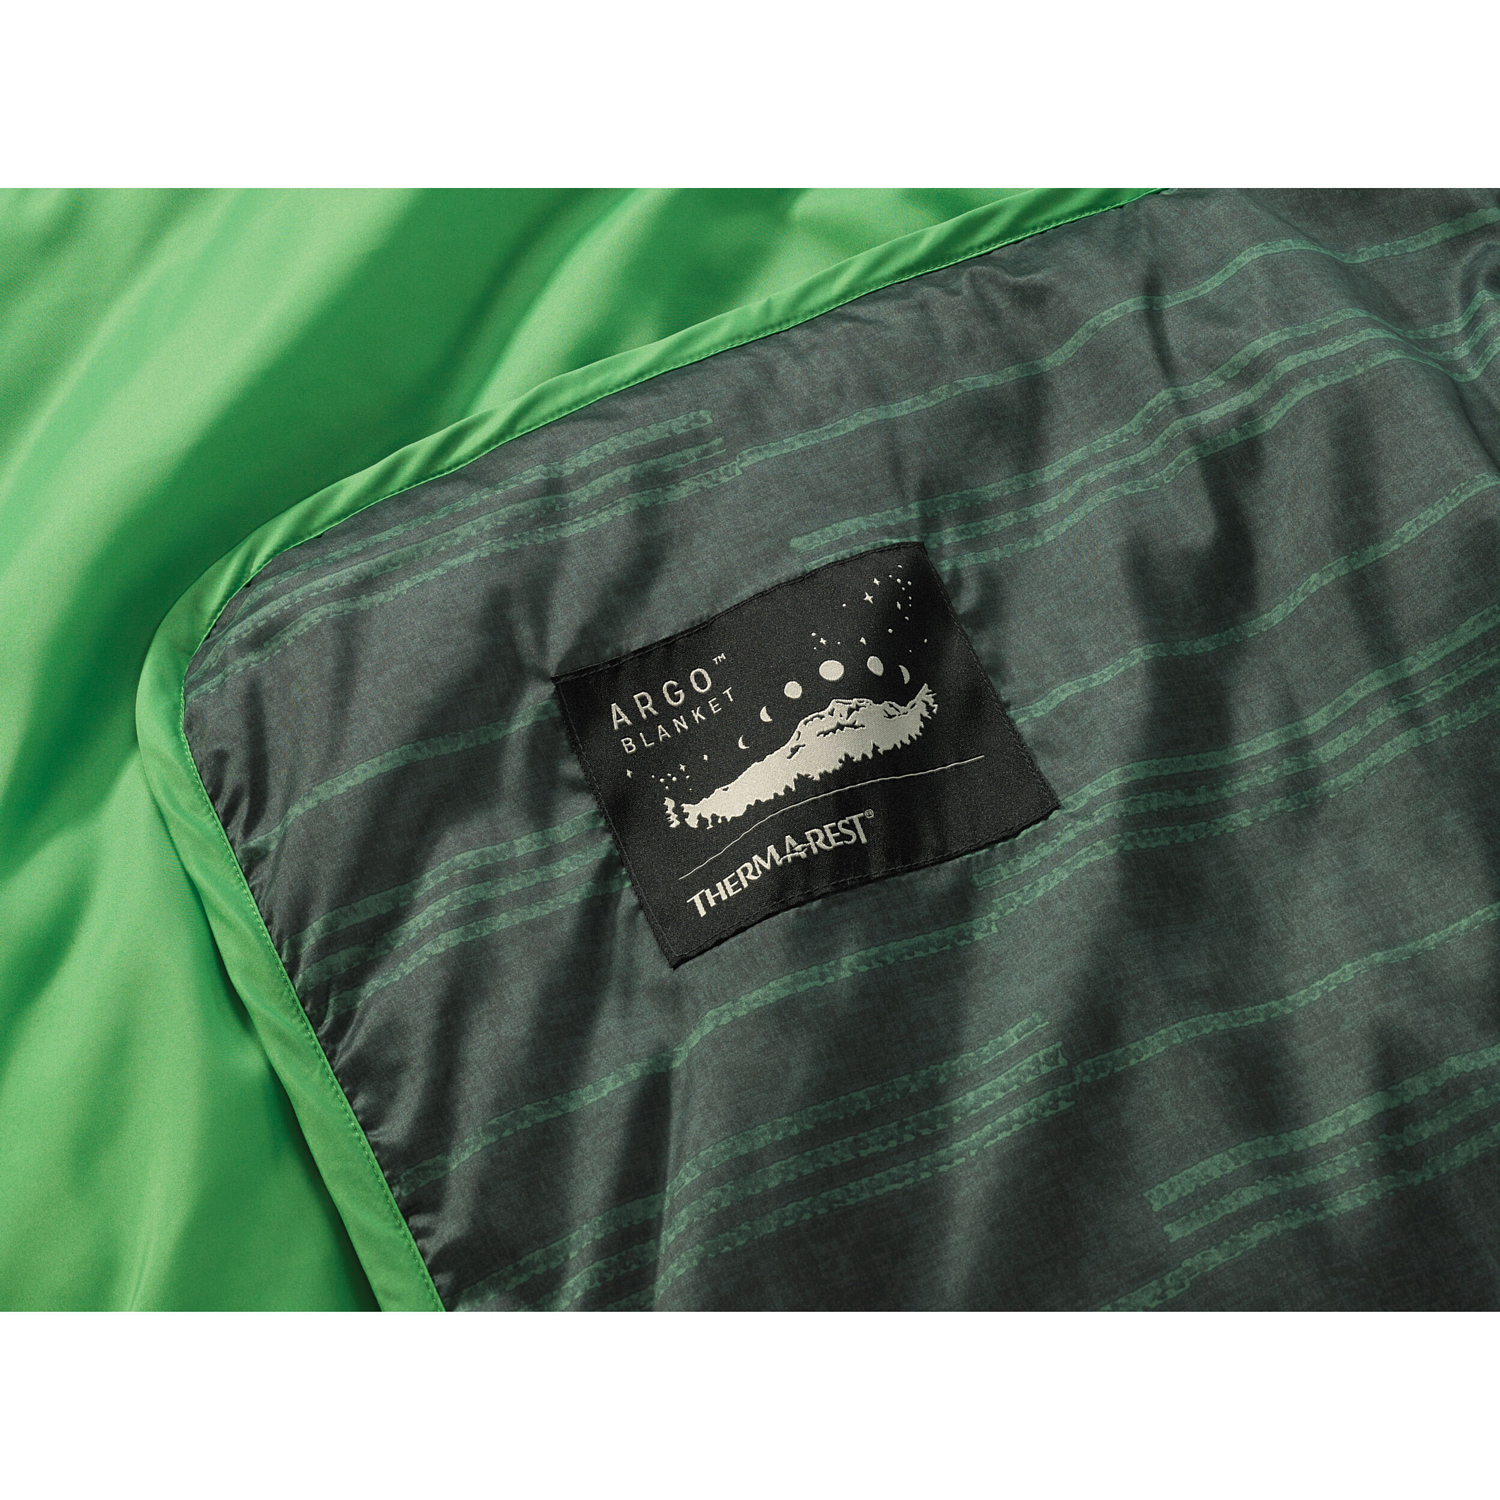 Одеяло THERM-A-REST Argo Blanket Green Print